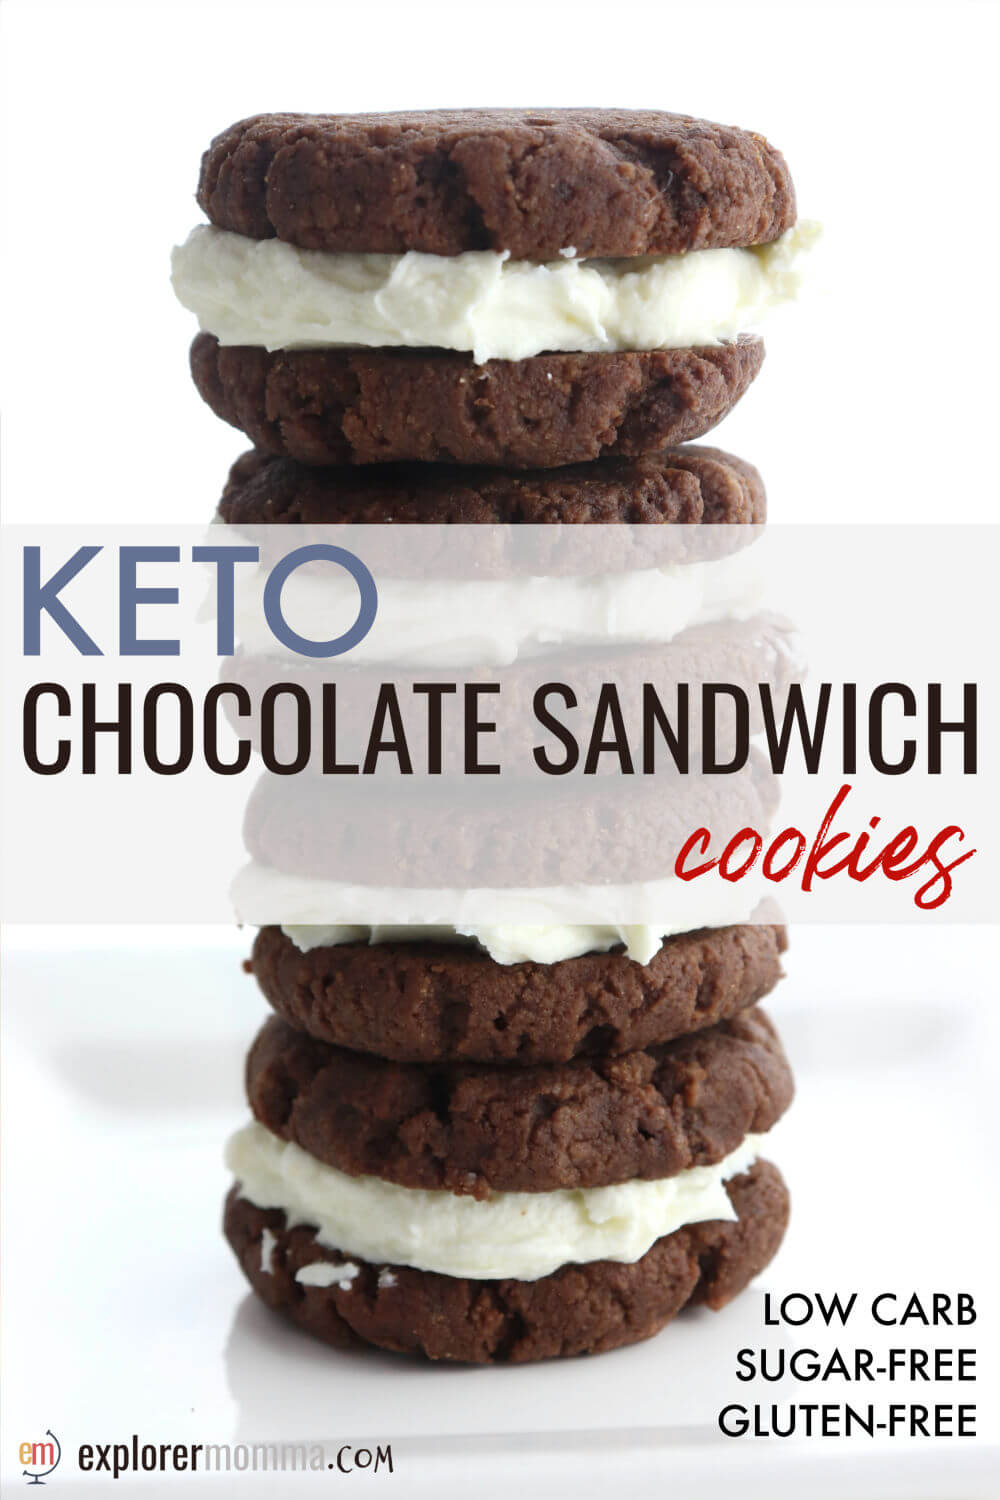 Low carb Keto Chocolate Sandwich Cookies are a fabulous soft copycat keto oreo, satisfy cravings yet are sugar-free and gluten-free. #ketodesserts #ketocookies #ketorecipes